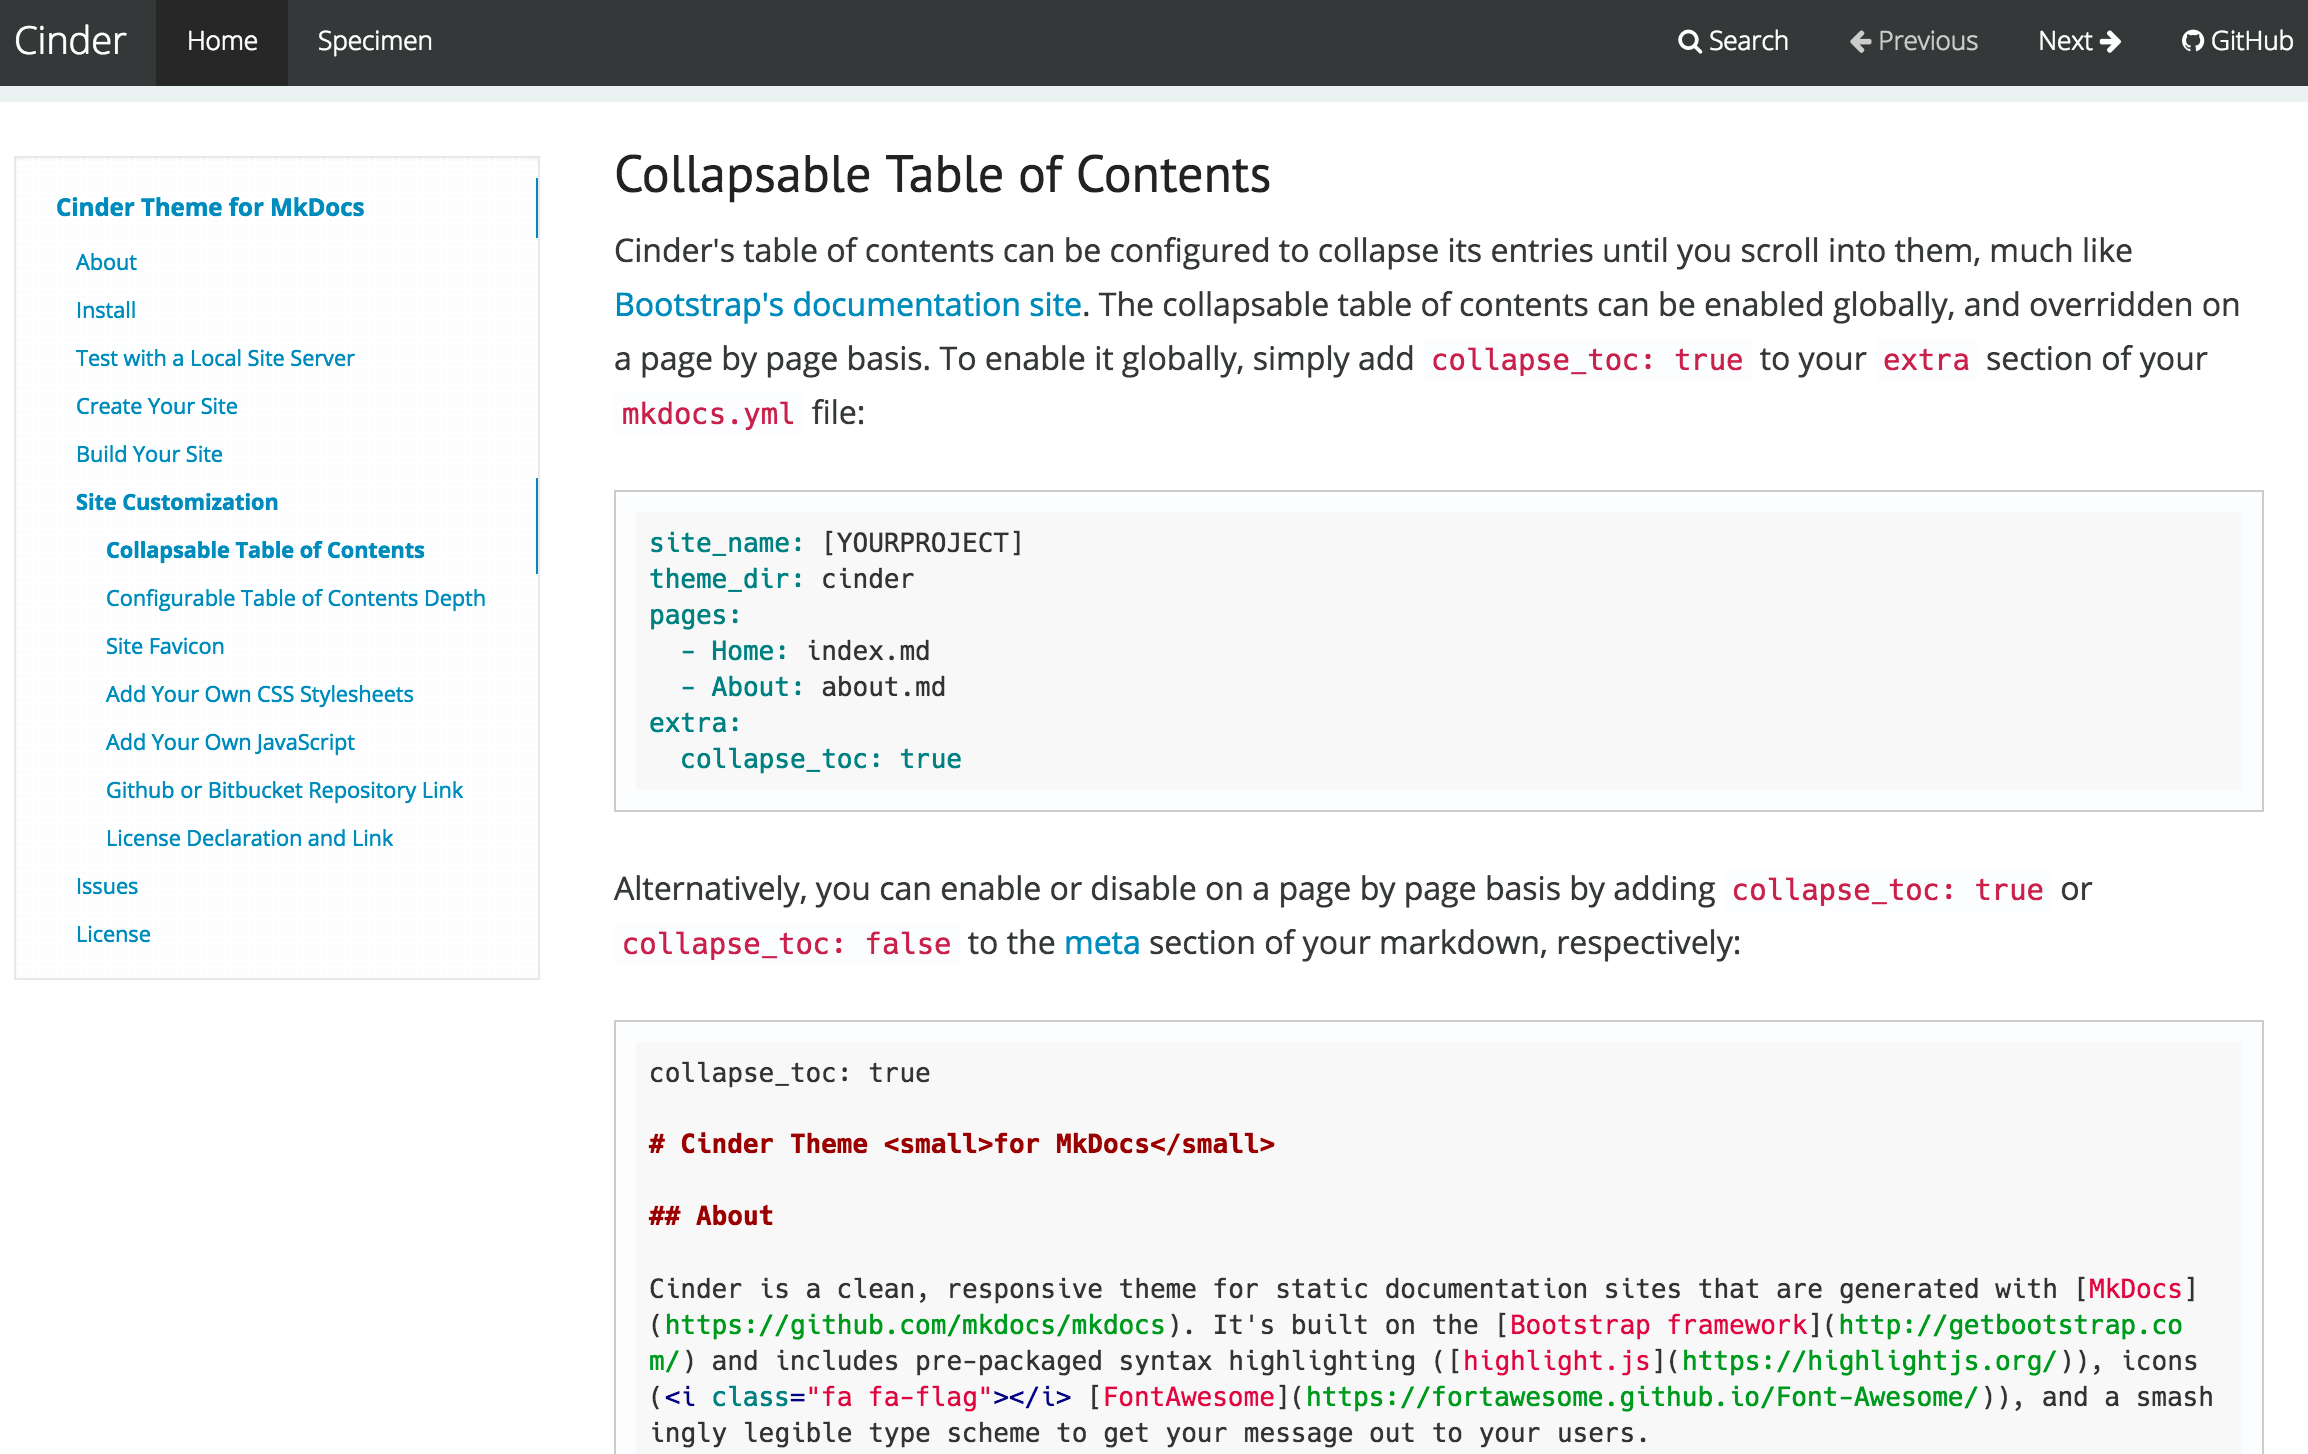 Collapsable Table Of Contents Screenshot